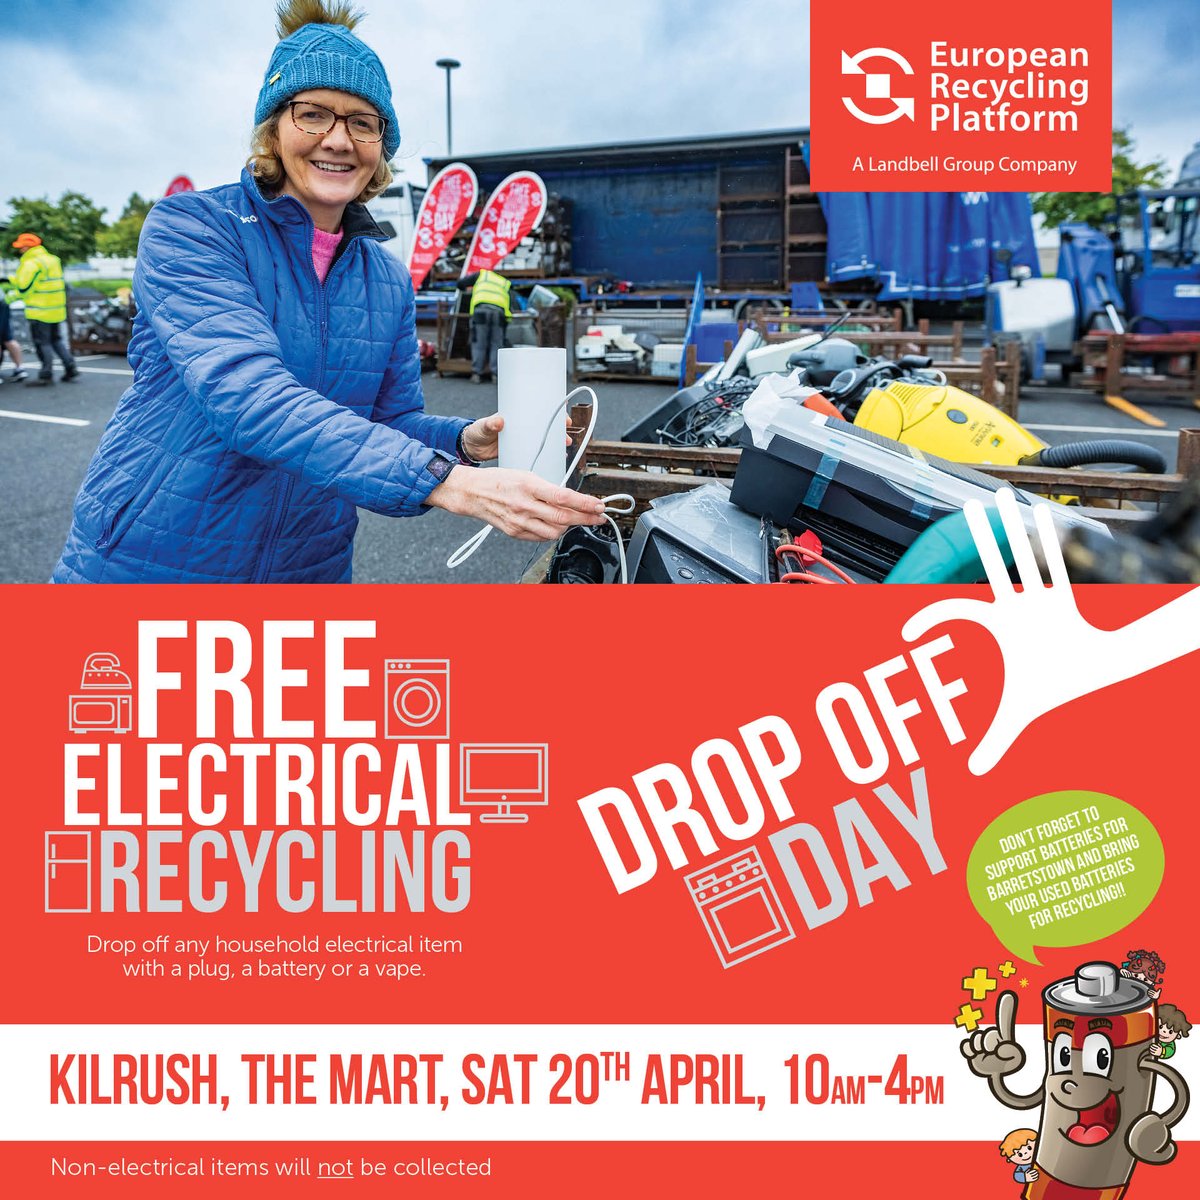 From #Clare? FREE @ERPIreland #Electrical #Recycling Drop-off day on Sat April 20th @ Kilrush Mart from 10.00am to 4.00pm w/ @ClareCoCo @MyWasteIreland - @burrencollege @ConnectClare @GreenerClare - Drop off any household item with a plug, cable or battery!